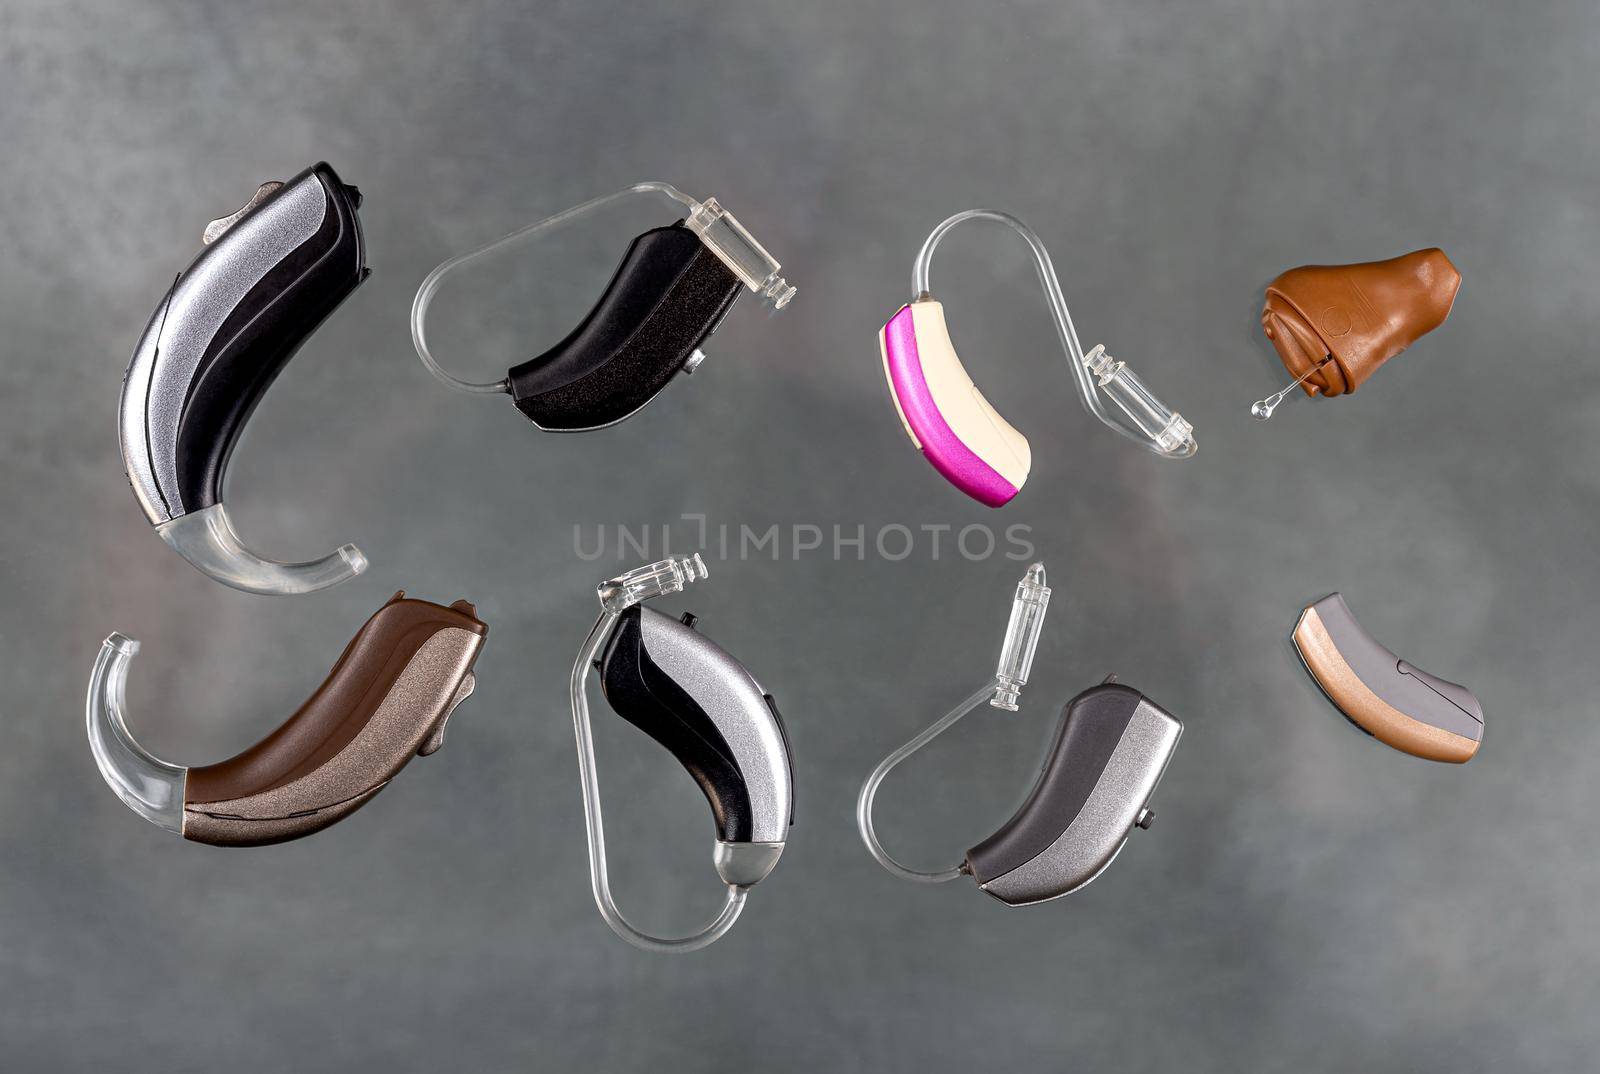 Hearing disorders-Hearing pothesis . Hearing aids by JPC-PROD